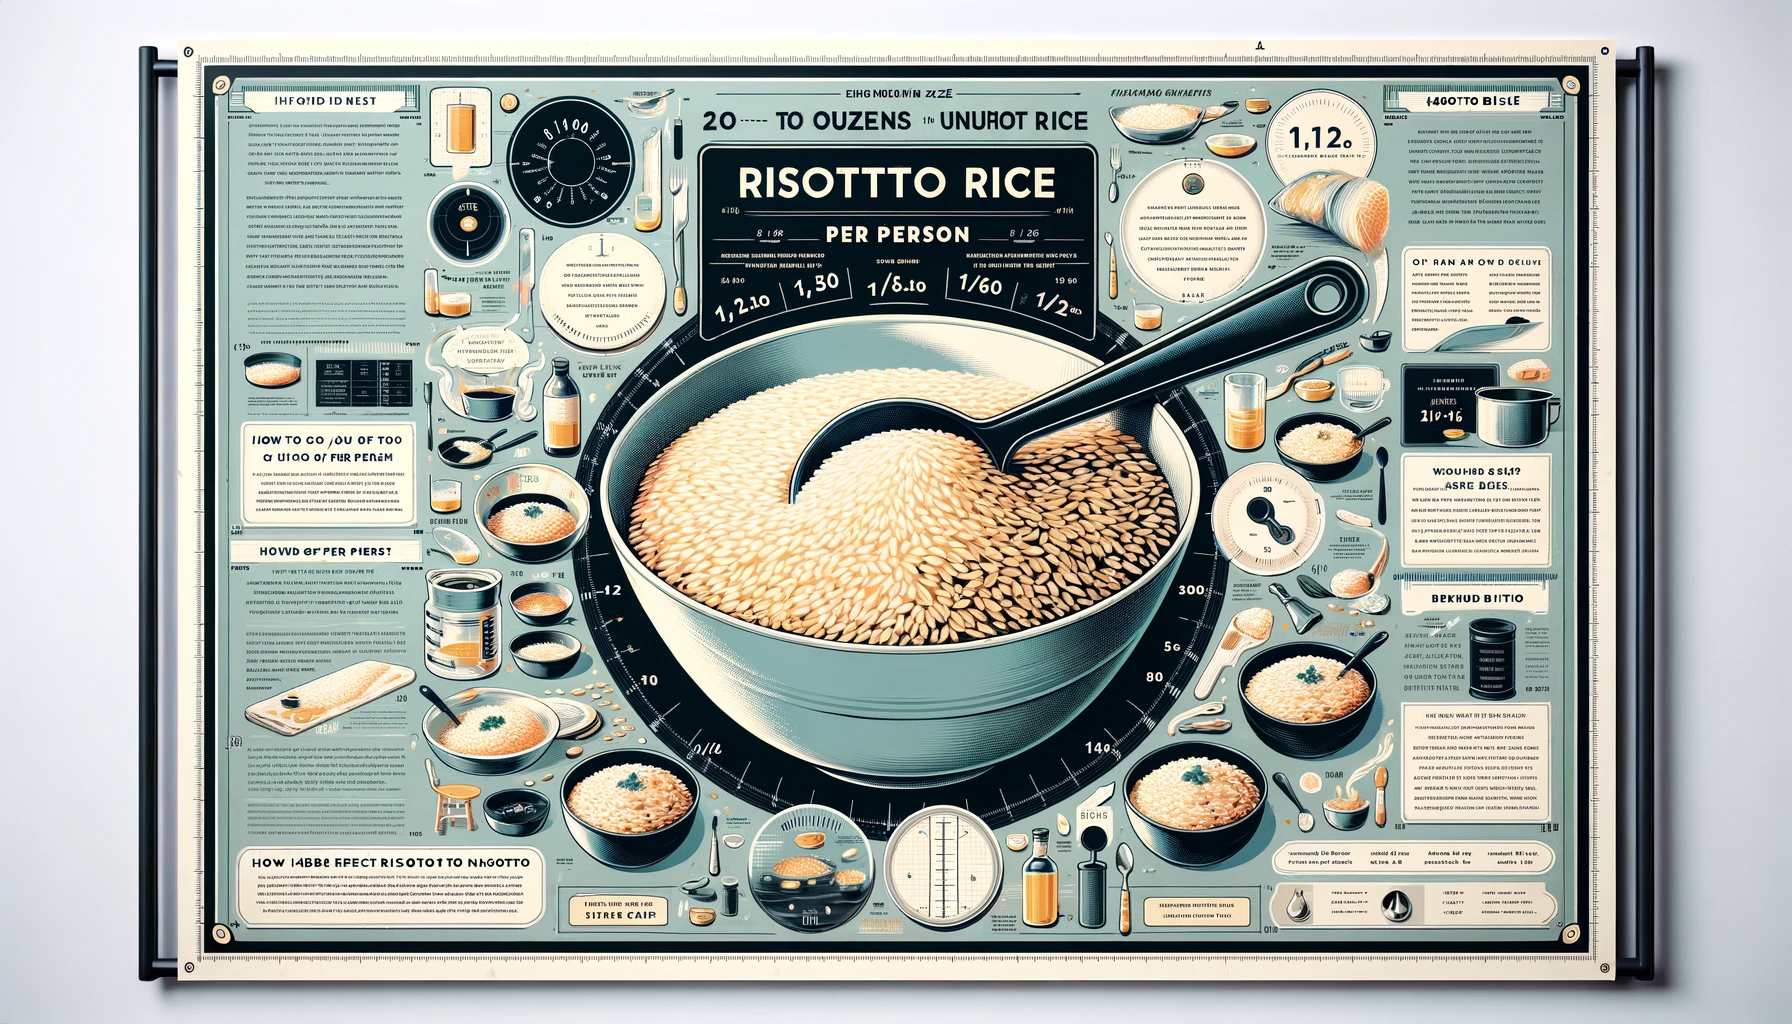 how many ounces of risotto rice per person